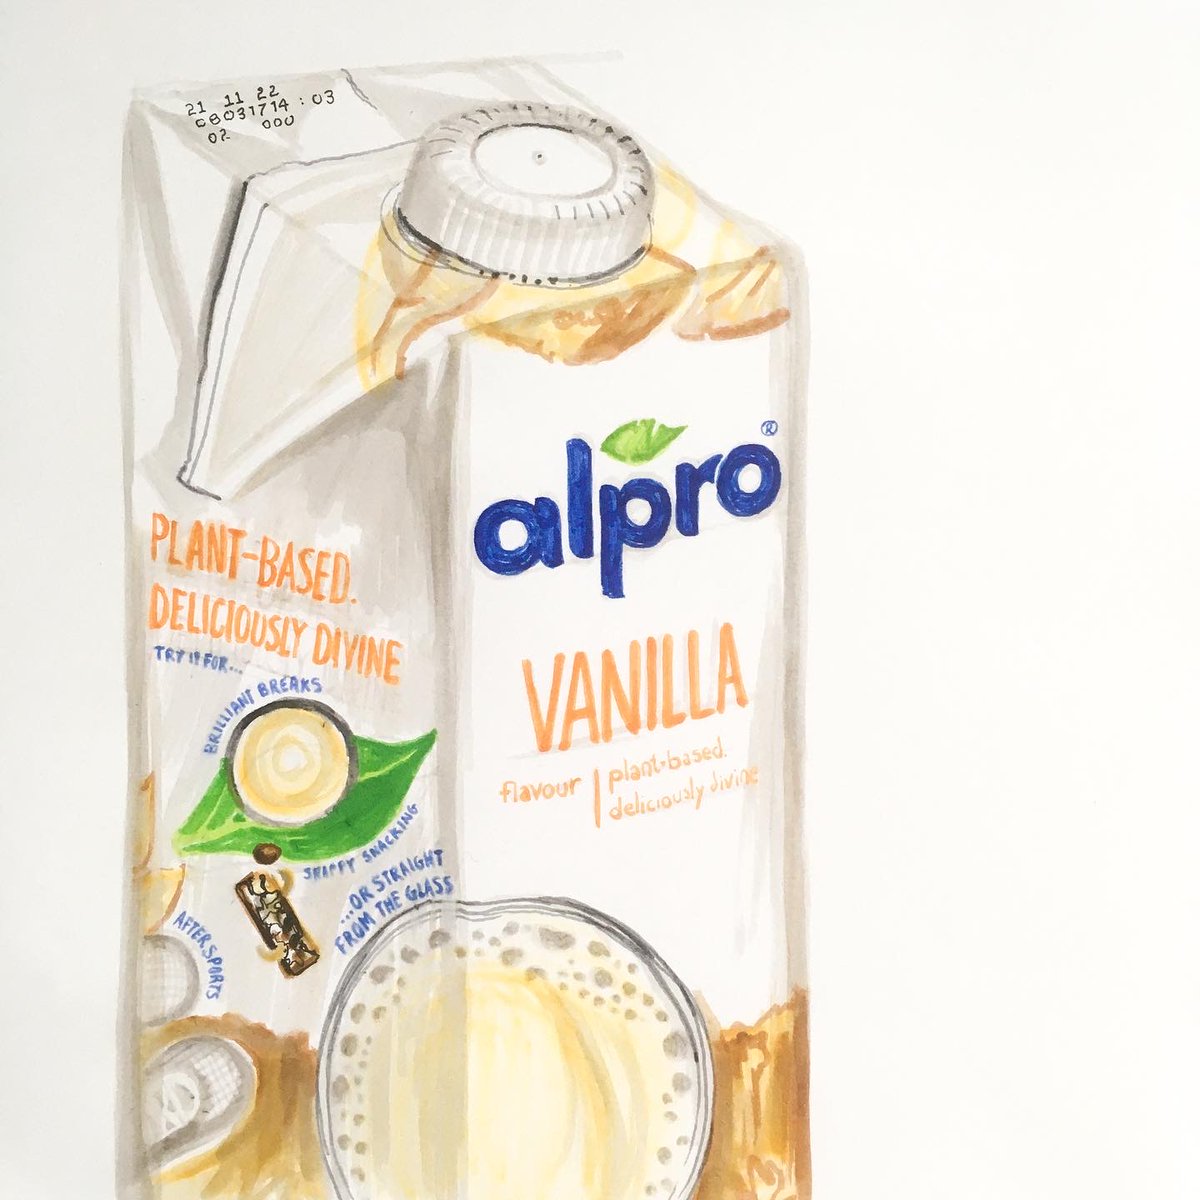 As usual, the freehand pen #drawing #illustration of a key ingredient @Alpro vanilla